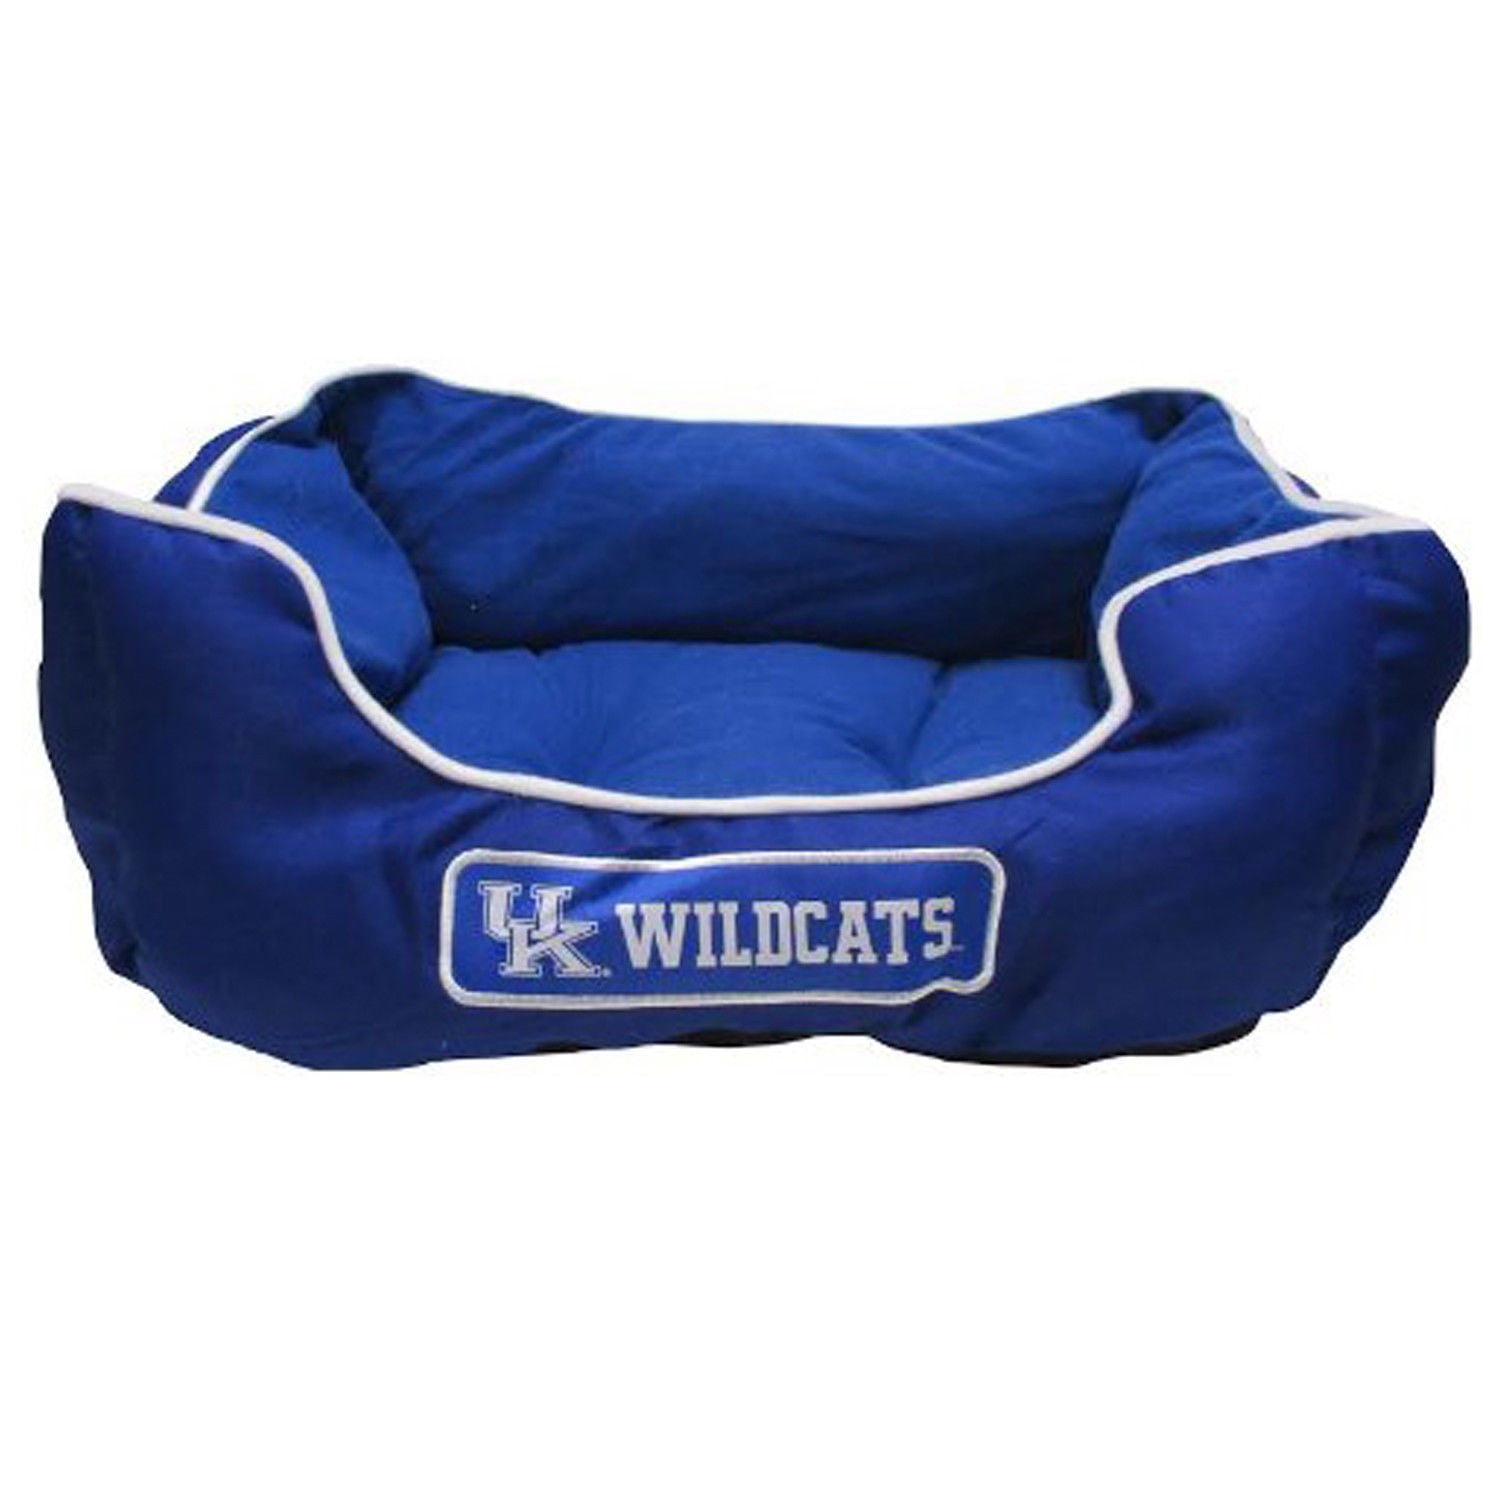  NCAA Kentucky Wildcats College Patch Fleece, Fabric by the Yard  : Sports & Outdoors